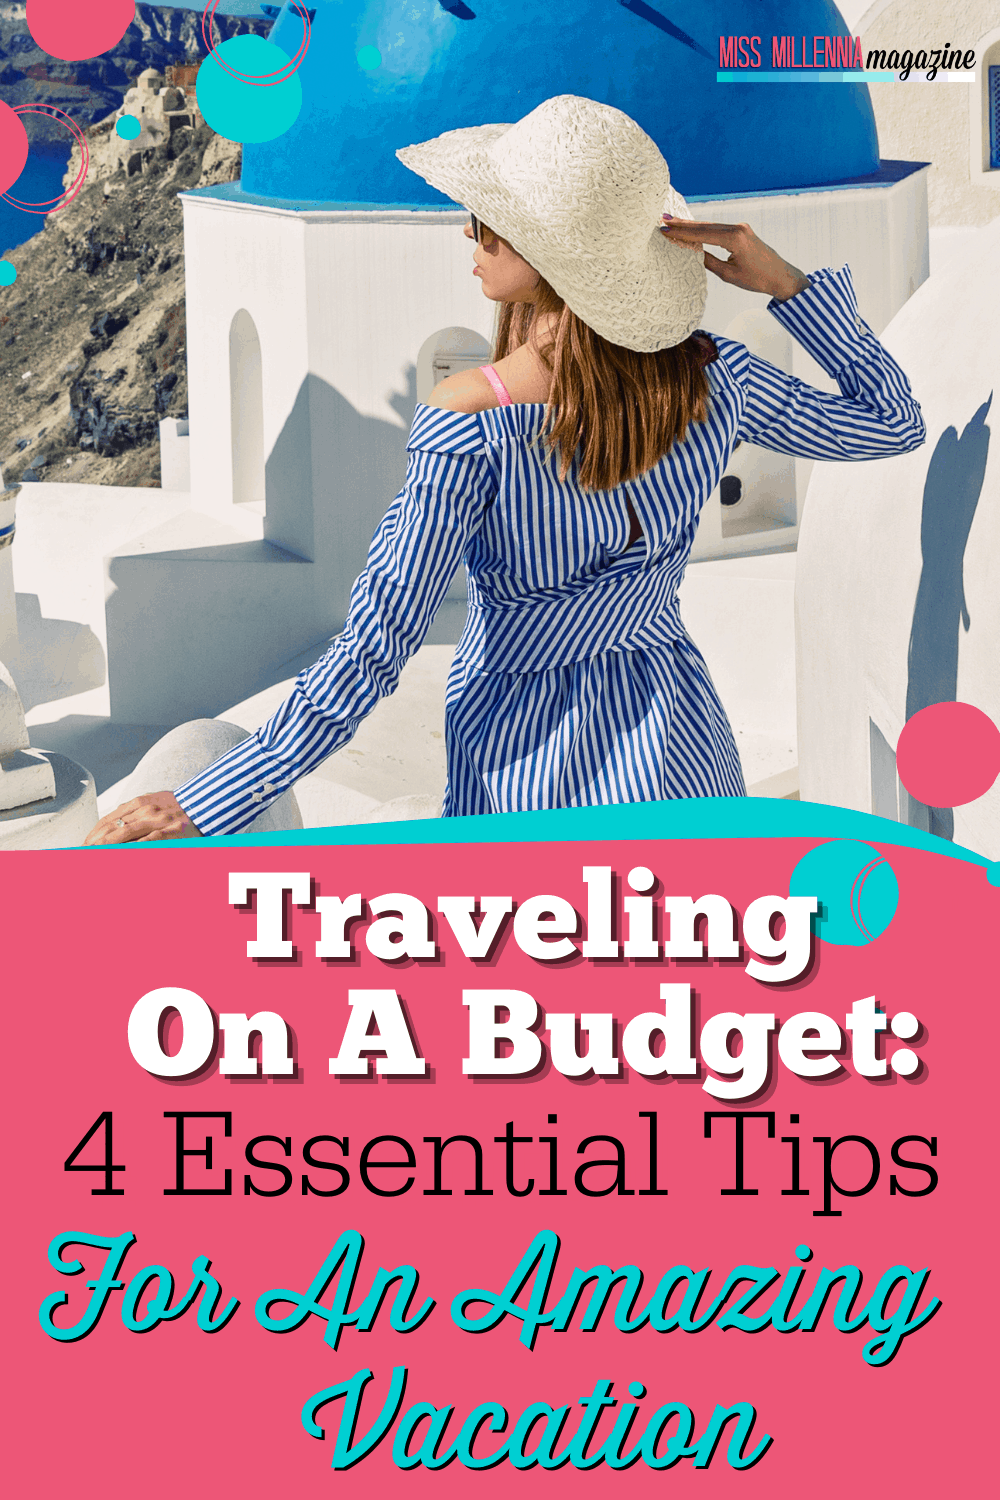 Traveling on a Budget: 4 Essential Tips for an Amazing Vacation